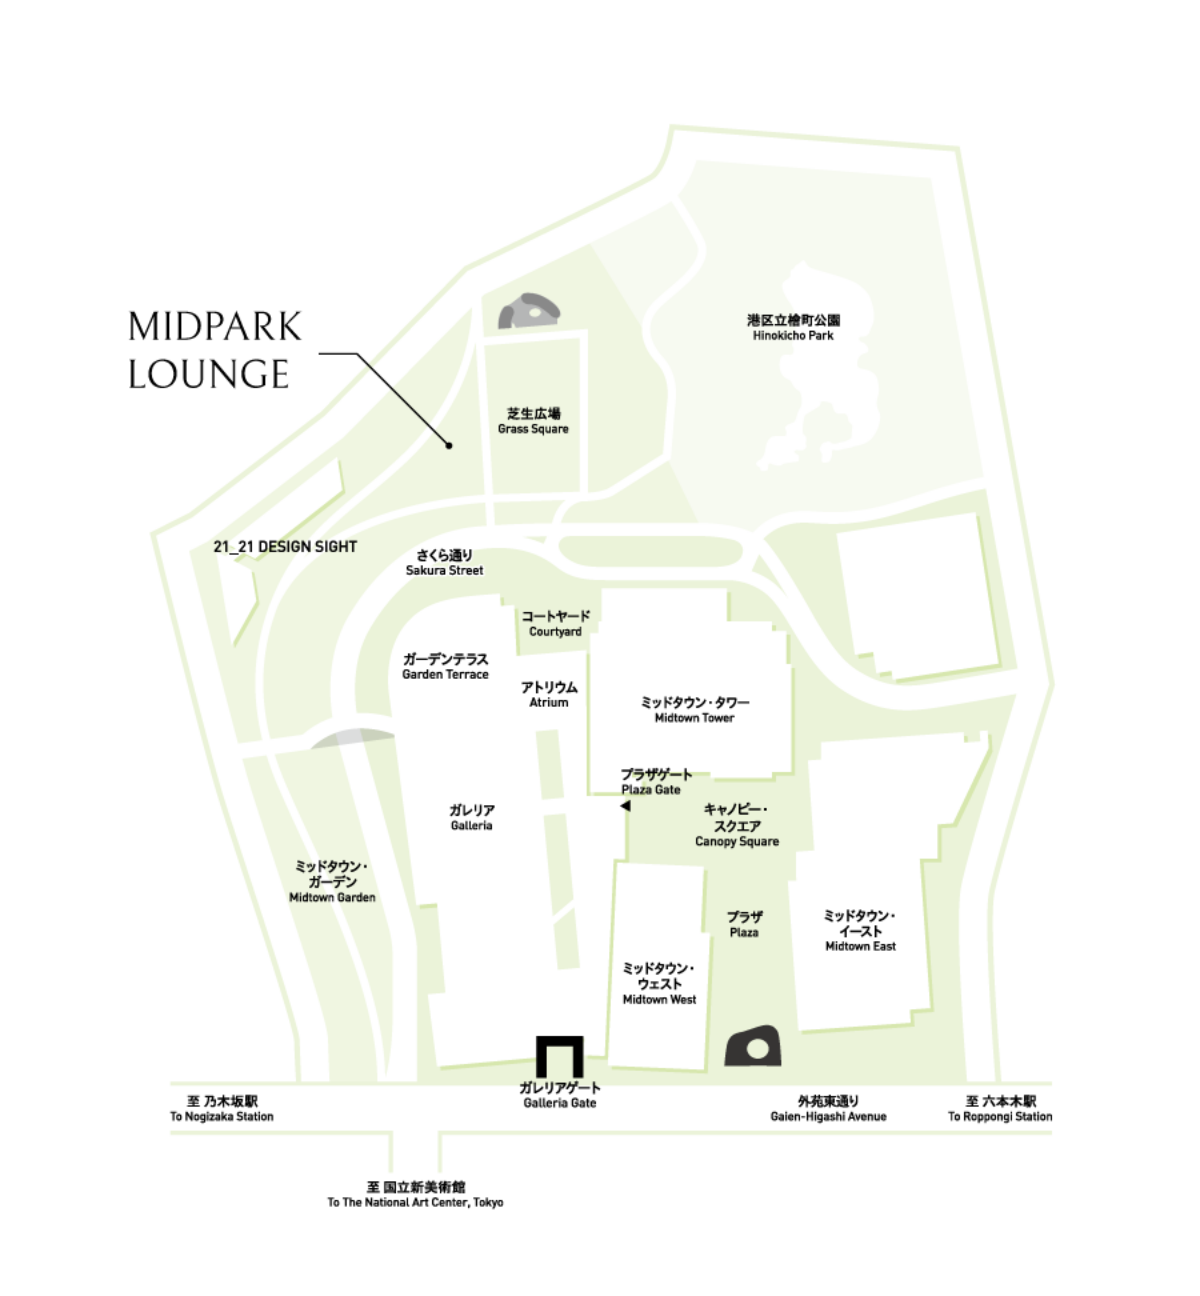 MIDPARK LOUNGE MAP